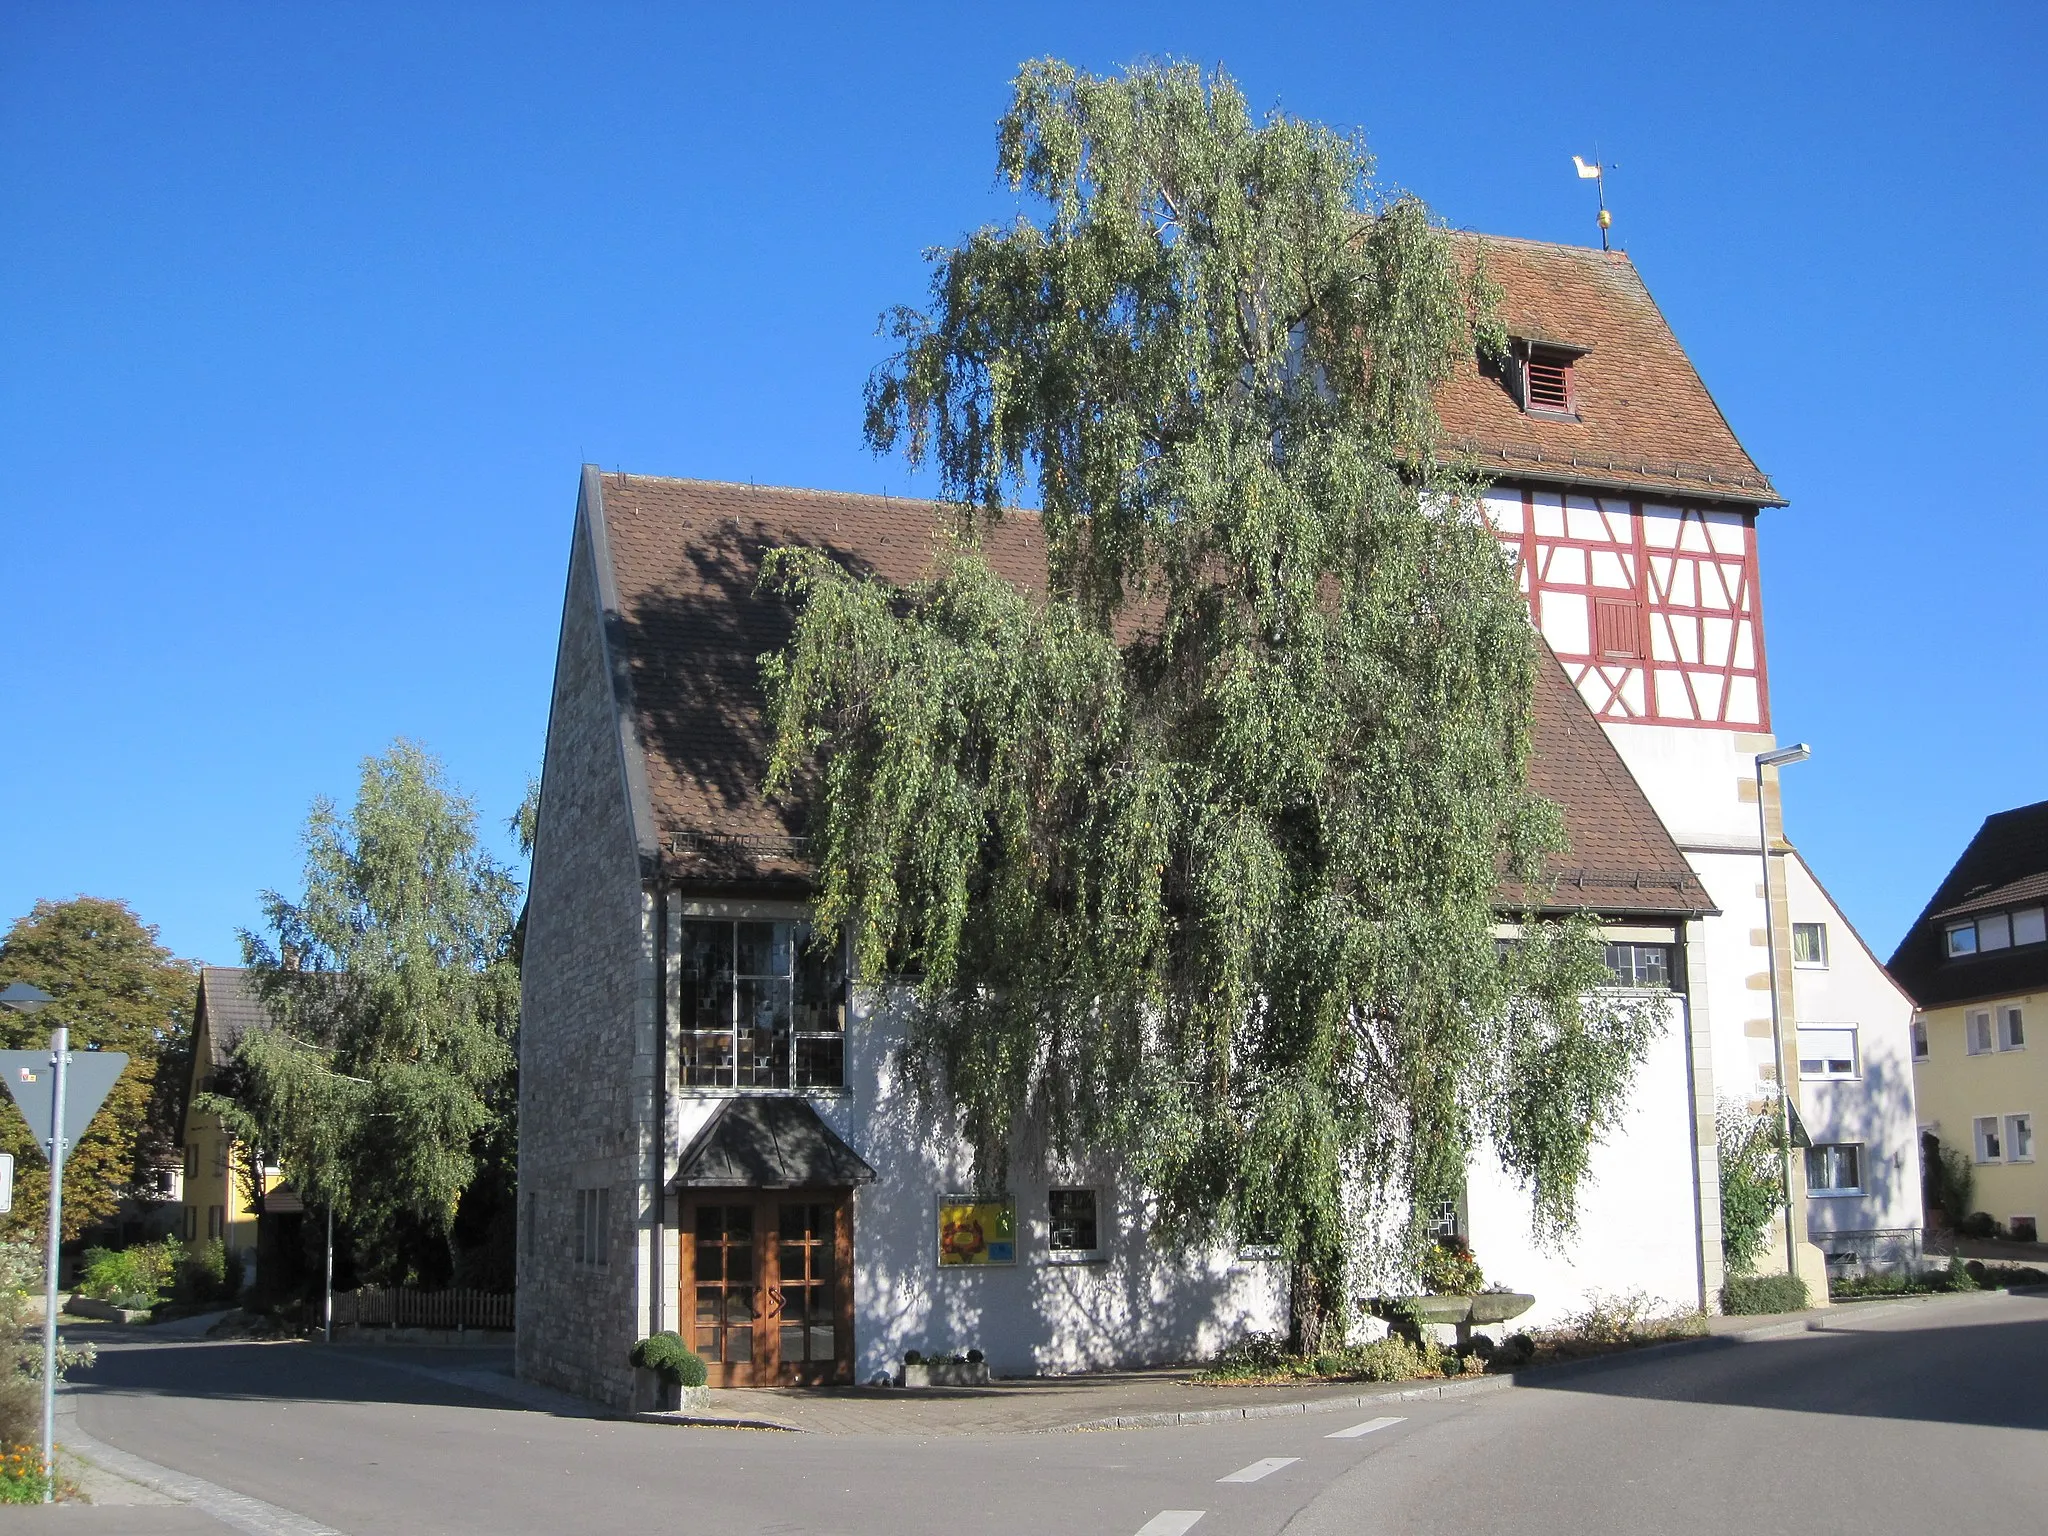 Photo showing: Church in Ingersheim, township of Crailsheim in Germany